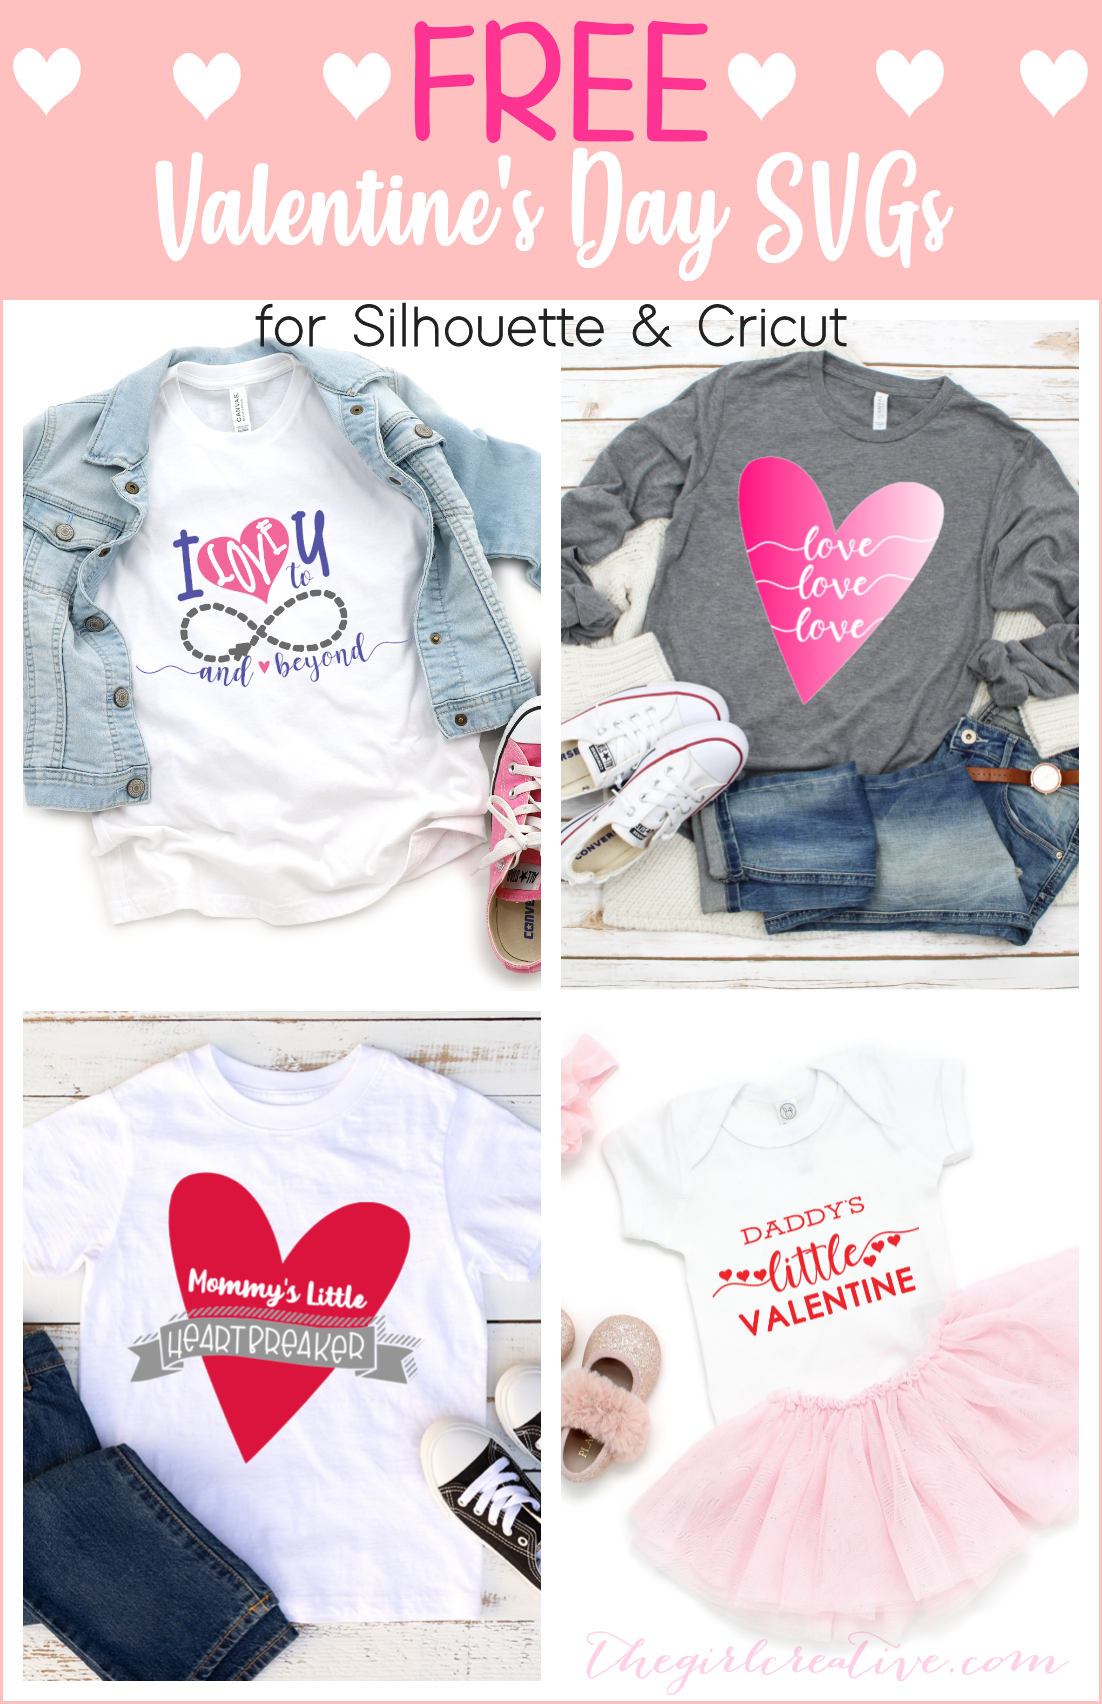 A collection of Valentine's Day SVG designs used on t-shirts that you can DIY yourself using your Cricut or Silhouette